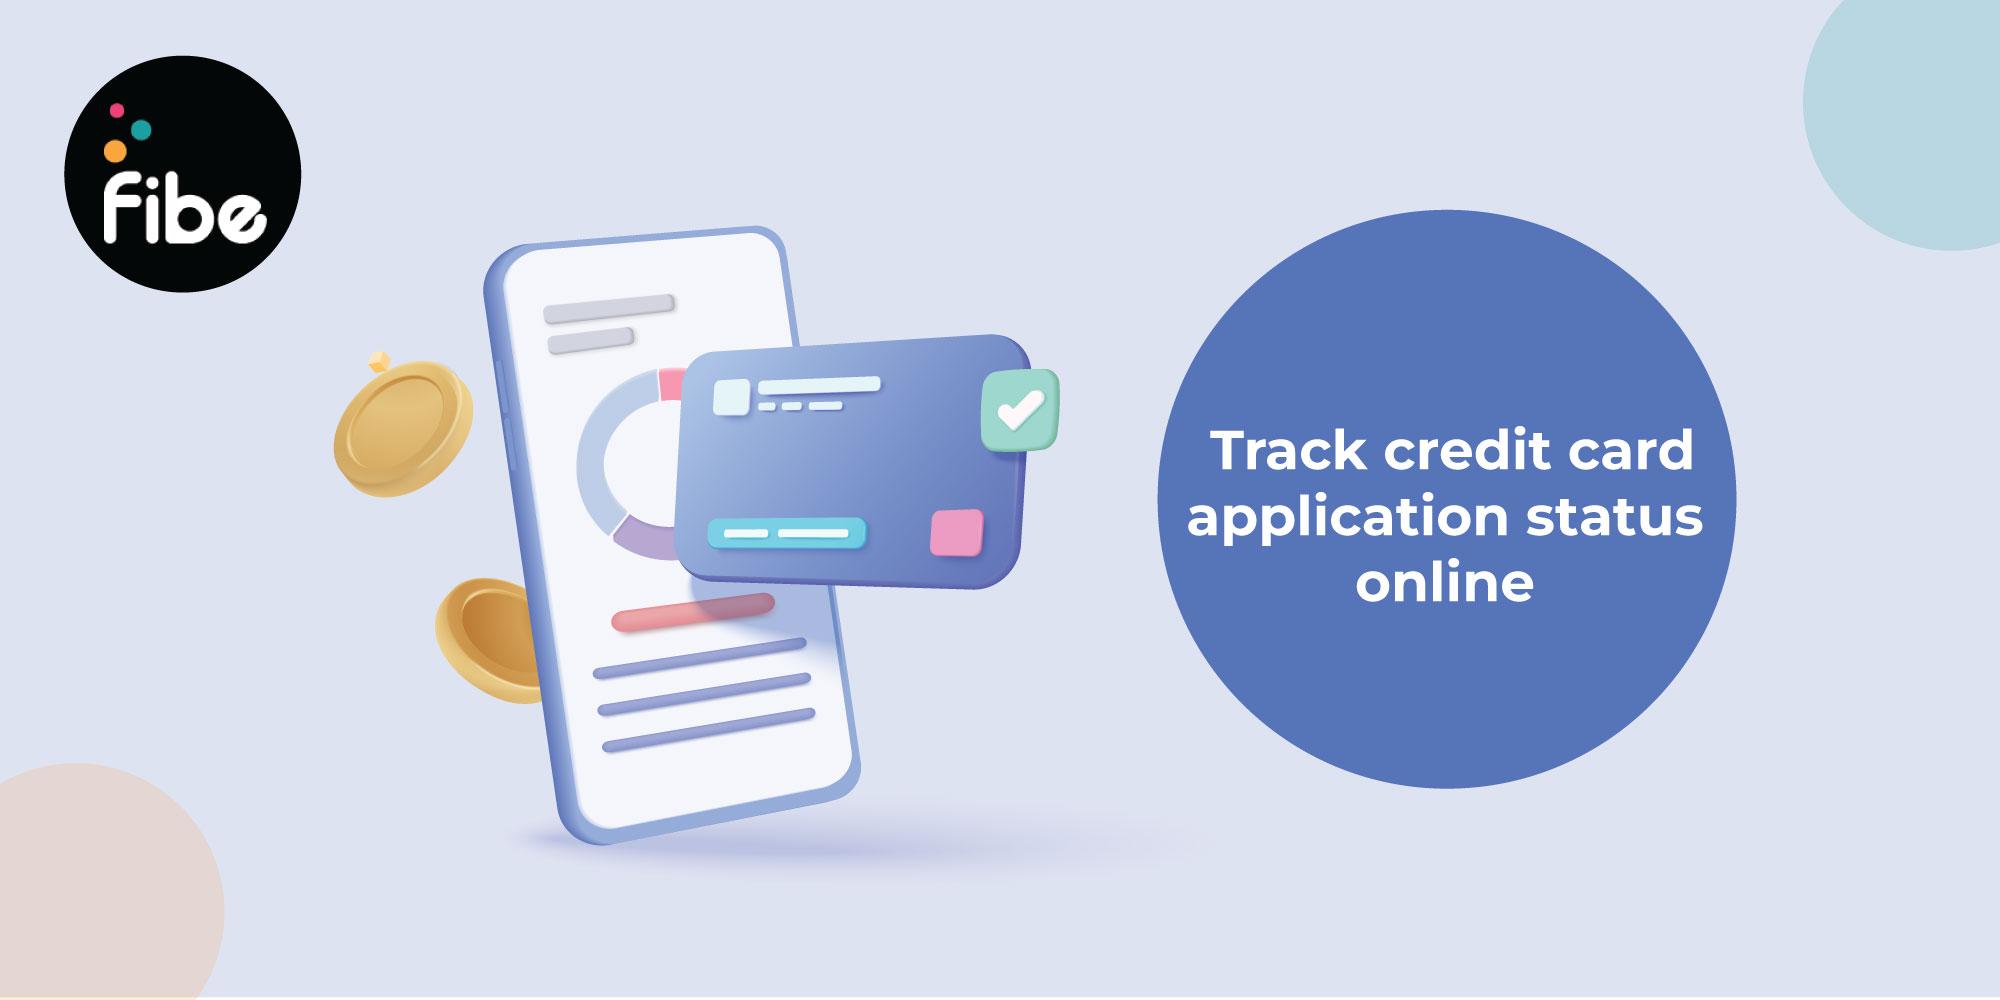 How to track Credit Card application? Easy options you can try